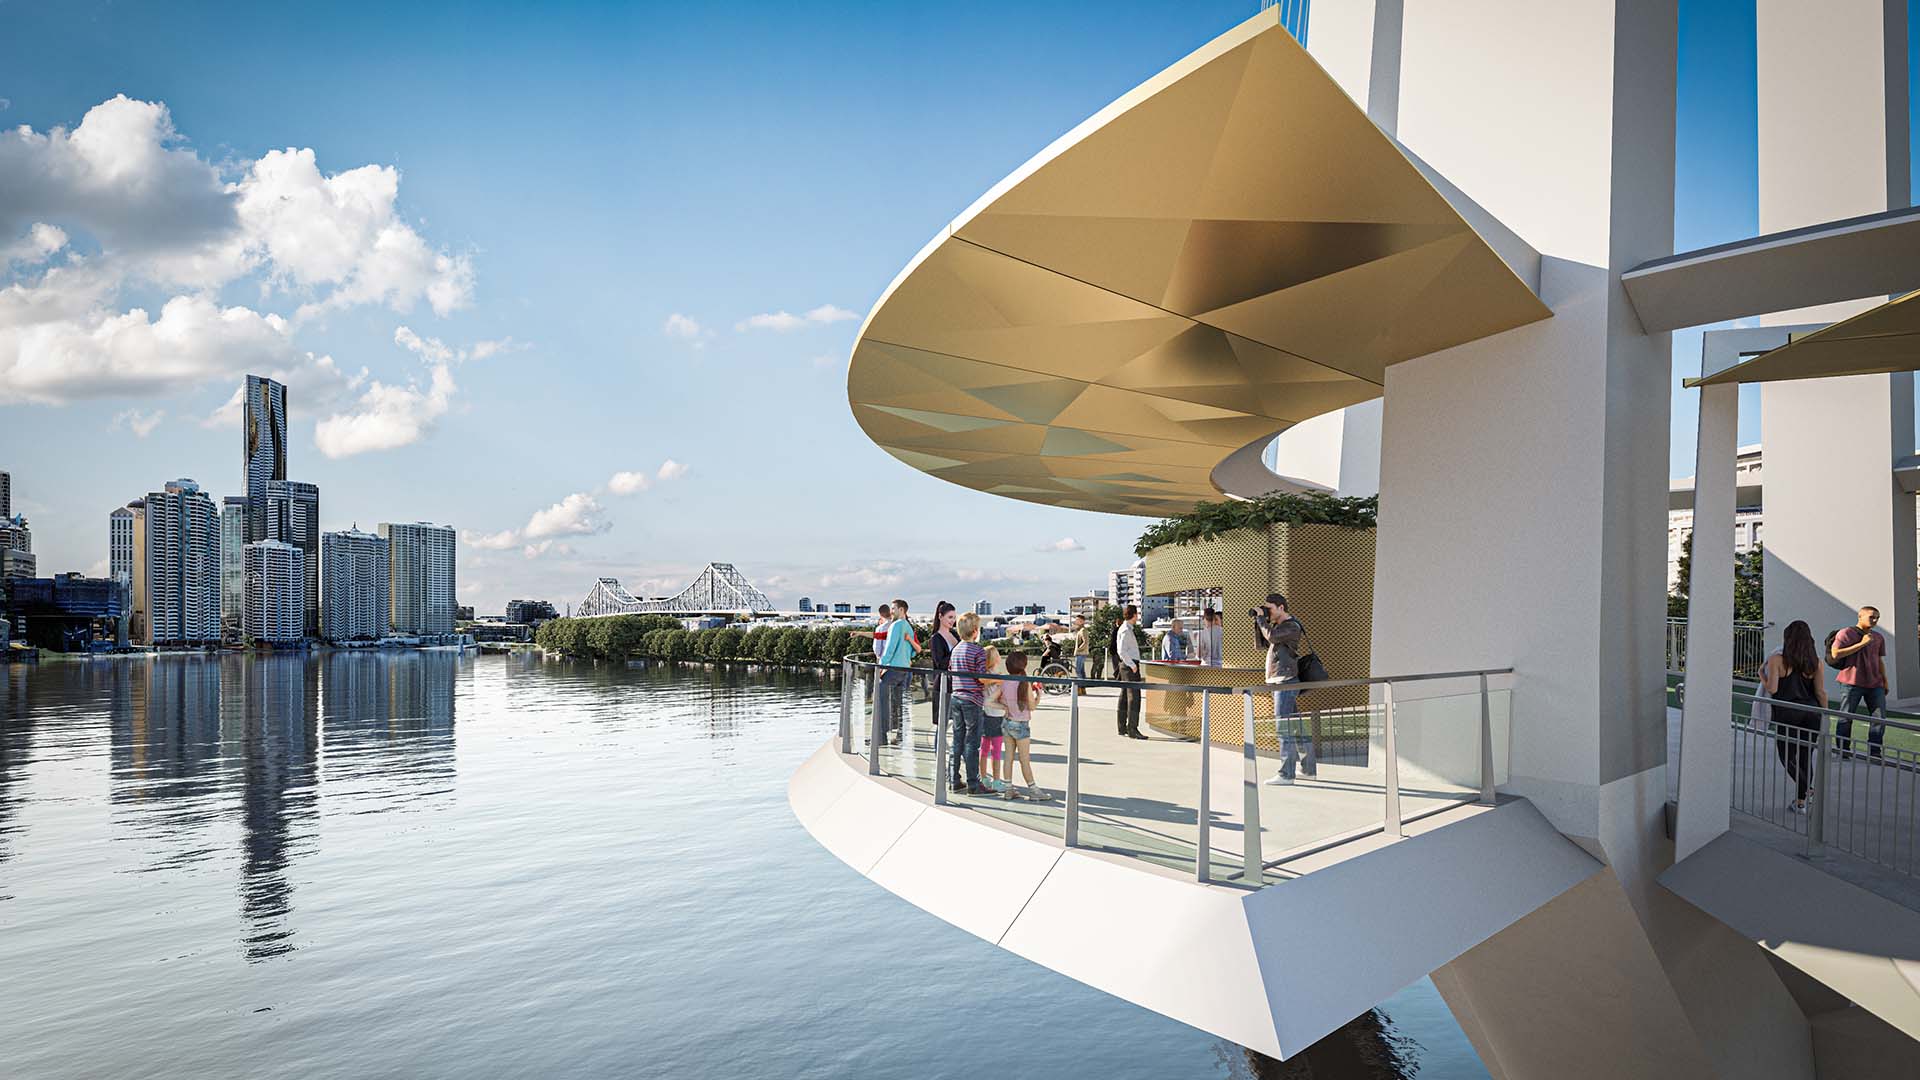 Kangaroo Point's New Green Bridge Is Set to Include an Overwater Bar and Restaurant